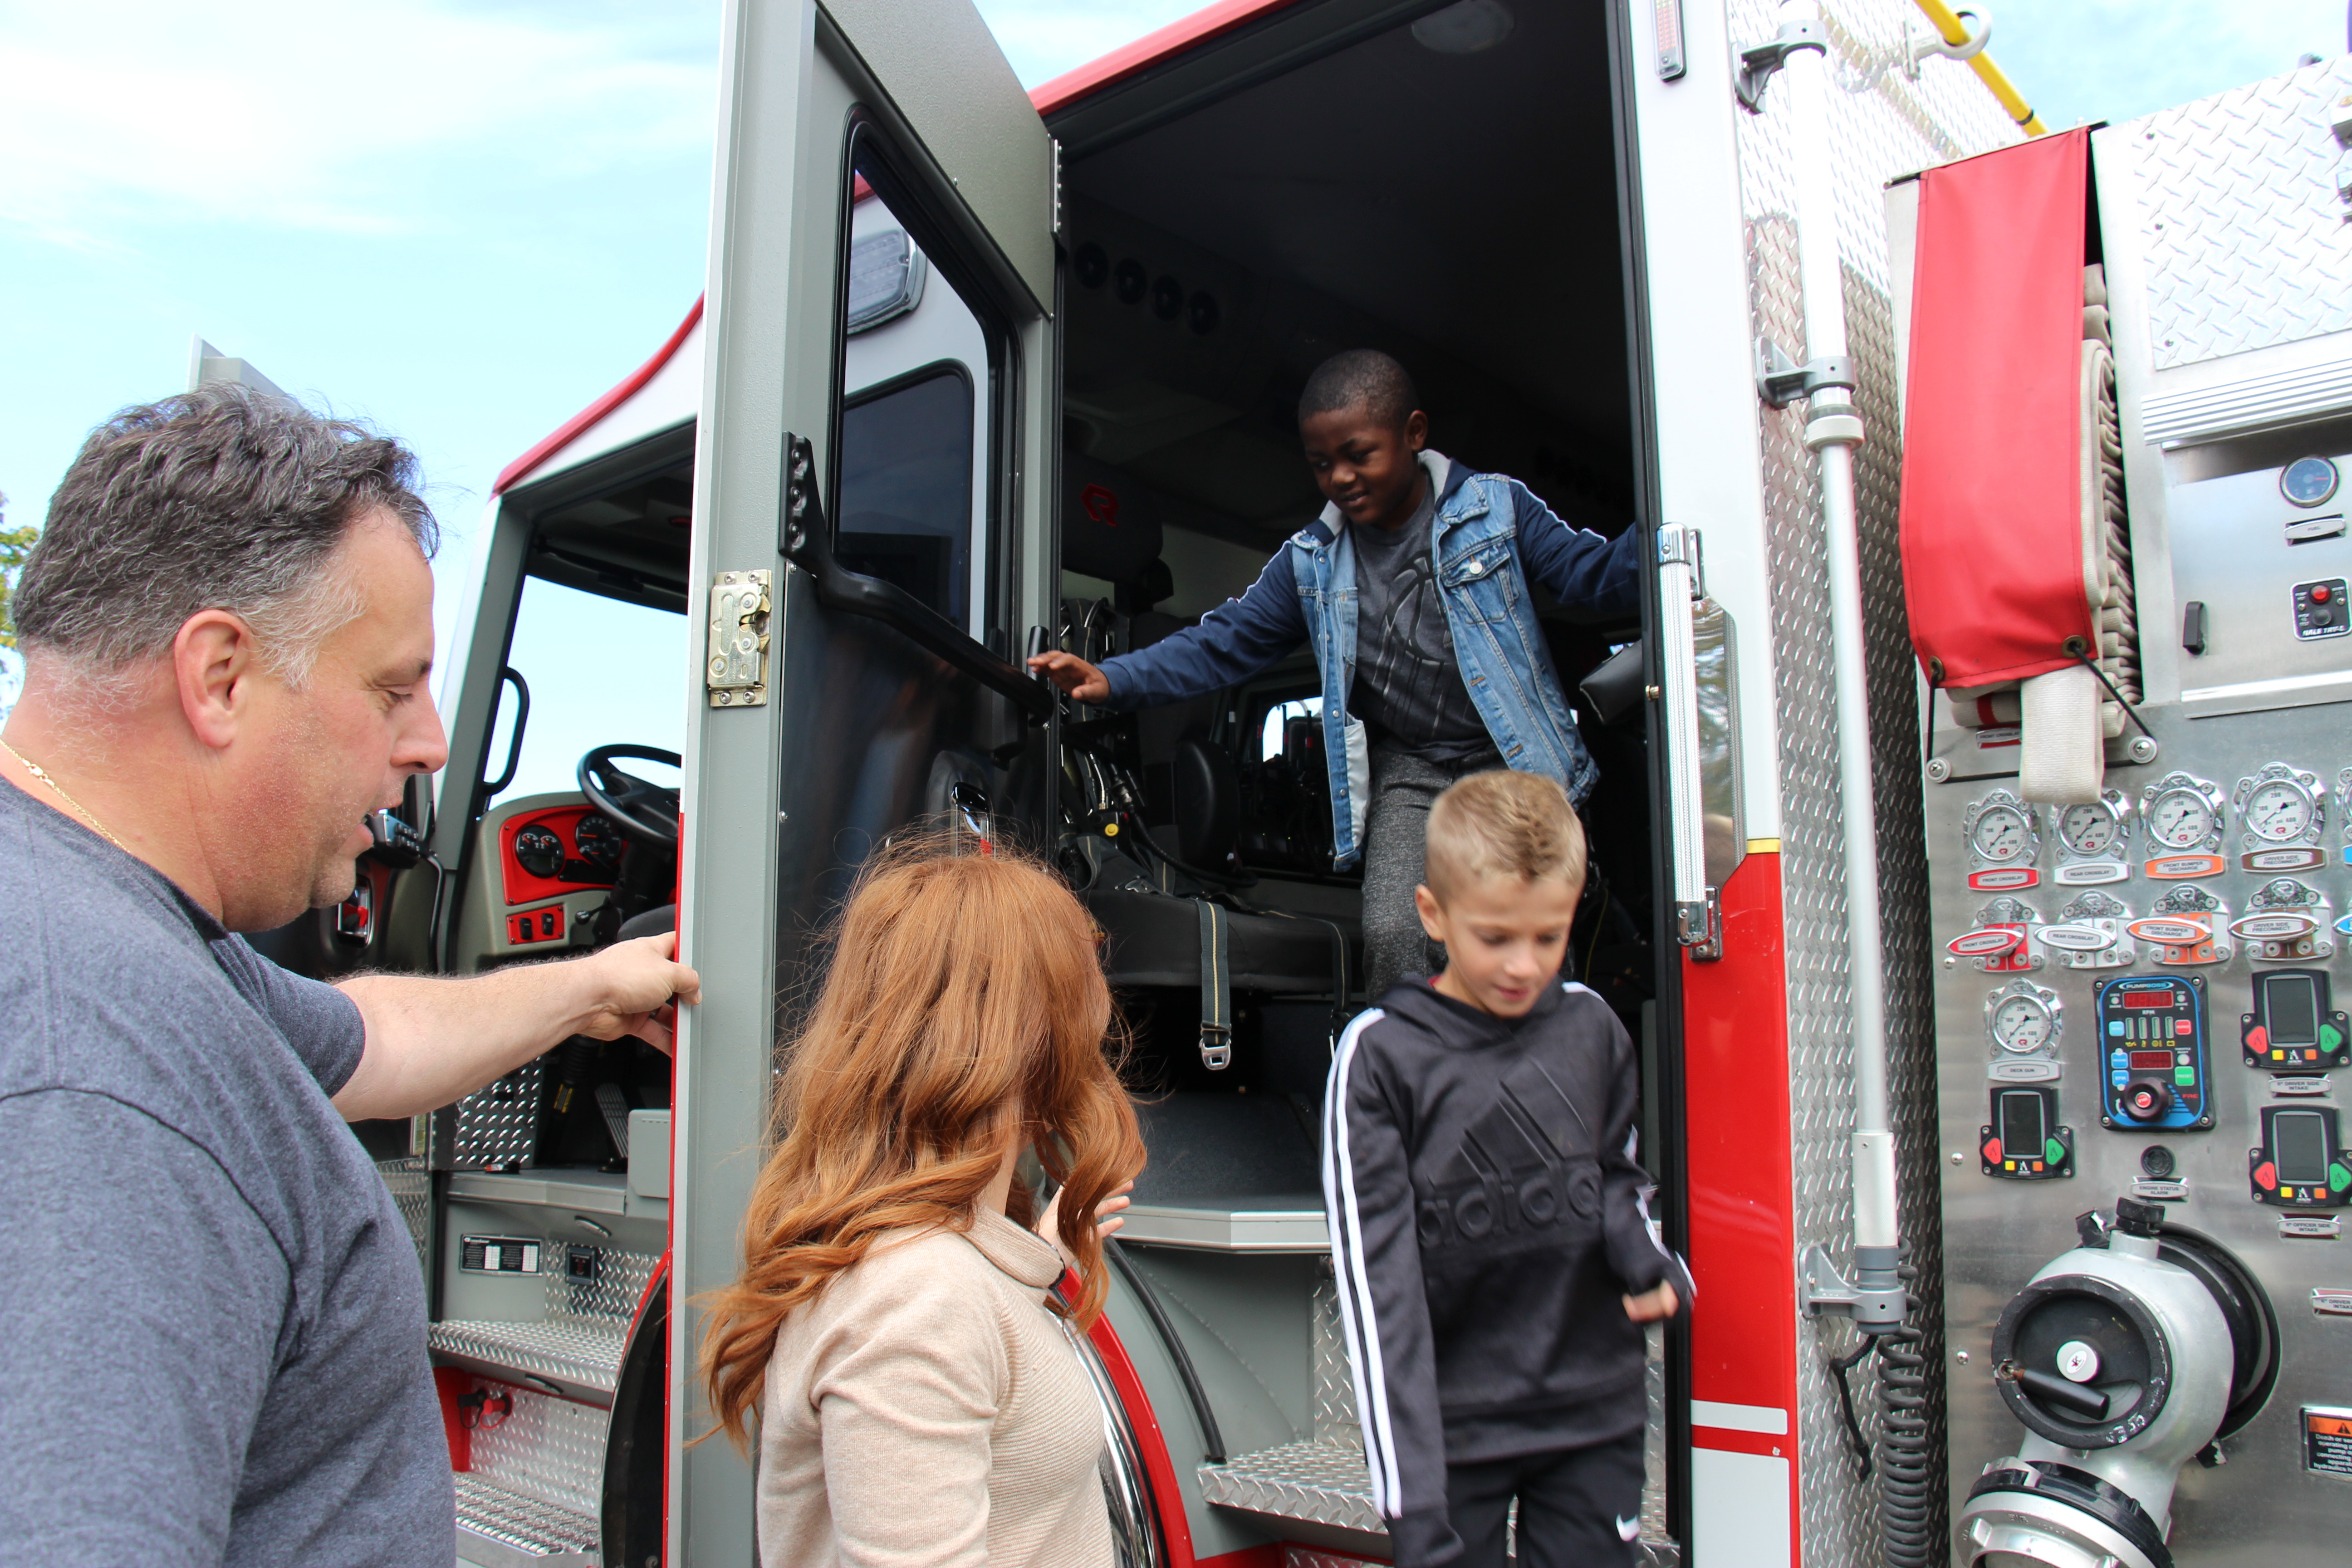 Two elementary school students come down the steps of a fire engine as a man holds the door open and a woman helps them.